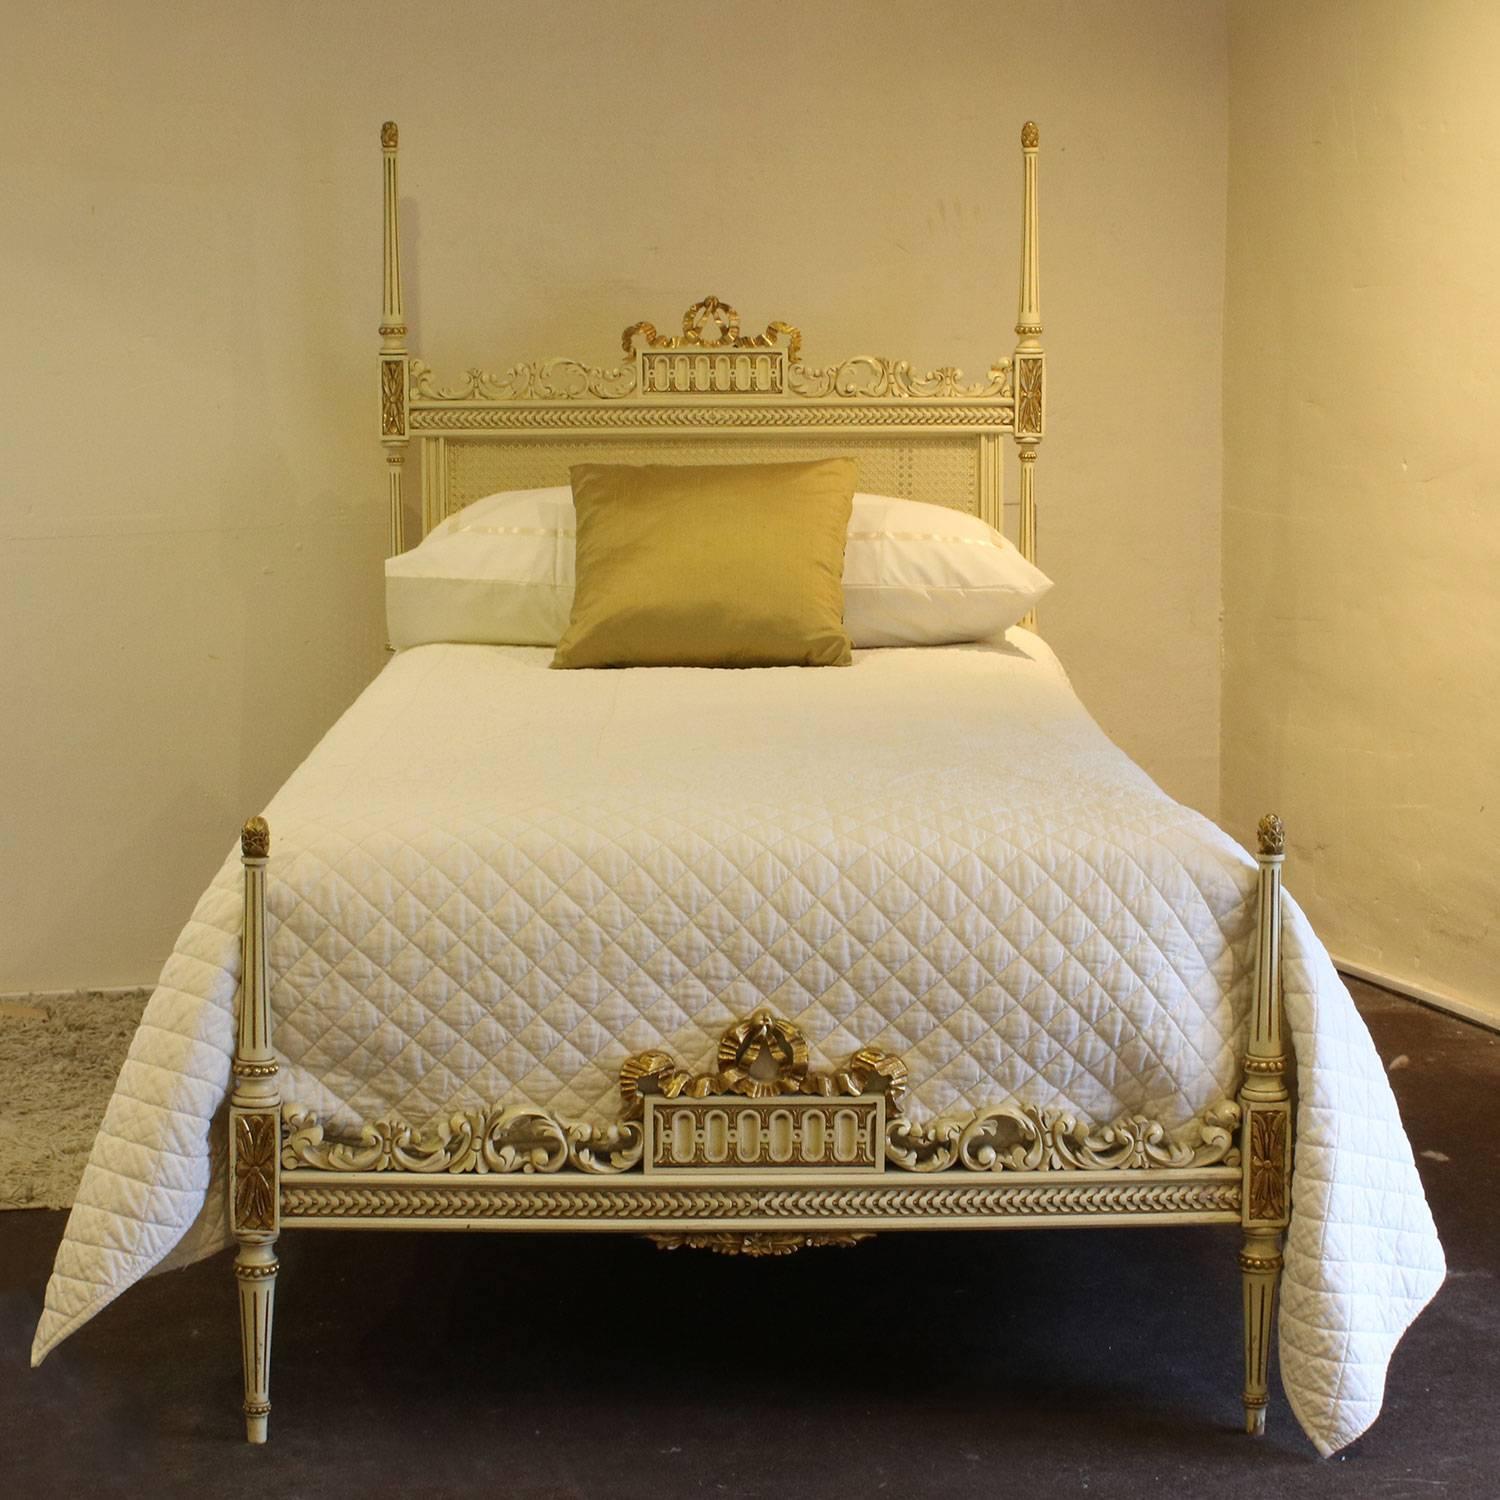 An attractive pair of twin beds with rattan cane panels, fine carving and torch on feet, painted in cream with gold.

These beds accept 3ft 3in wide bases and mattresses (39 in or 100cm) and the beds can Stand together to make a 6ft 6in wide bed